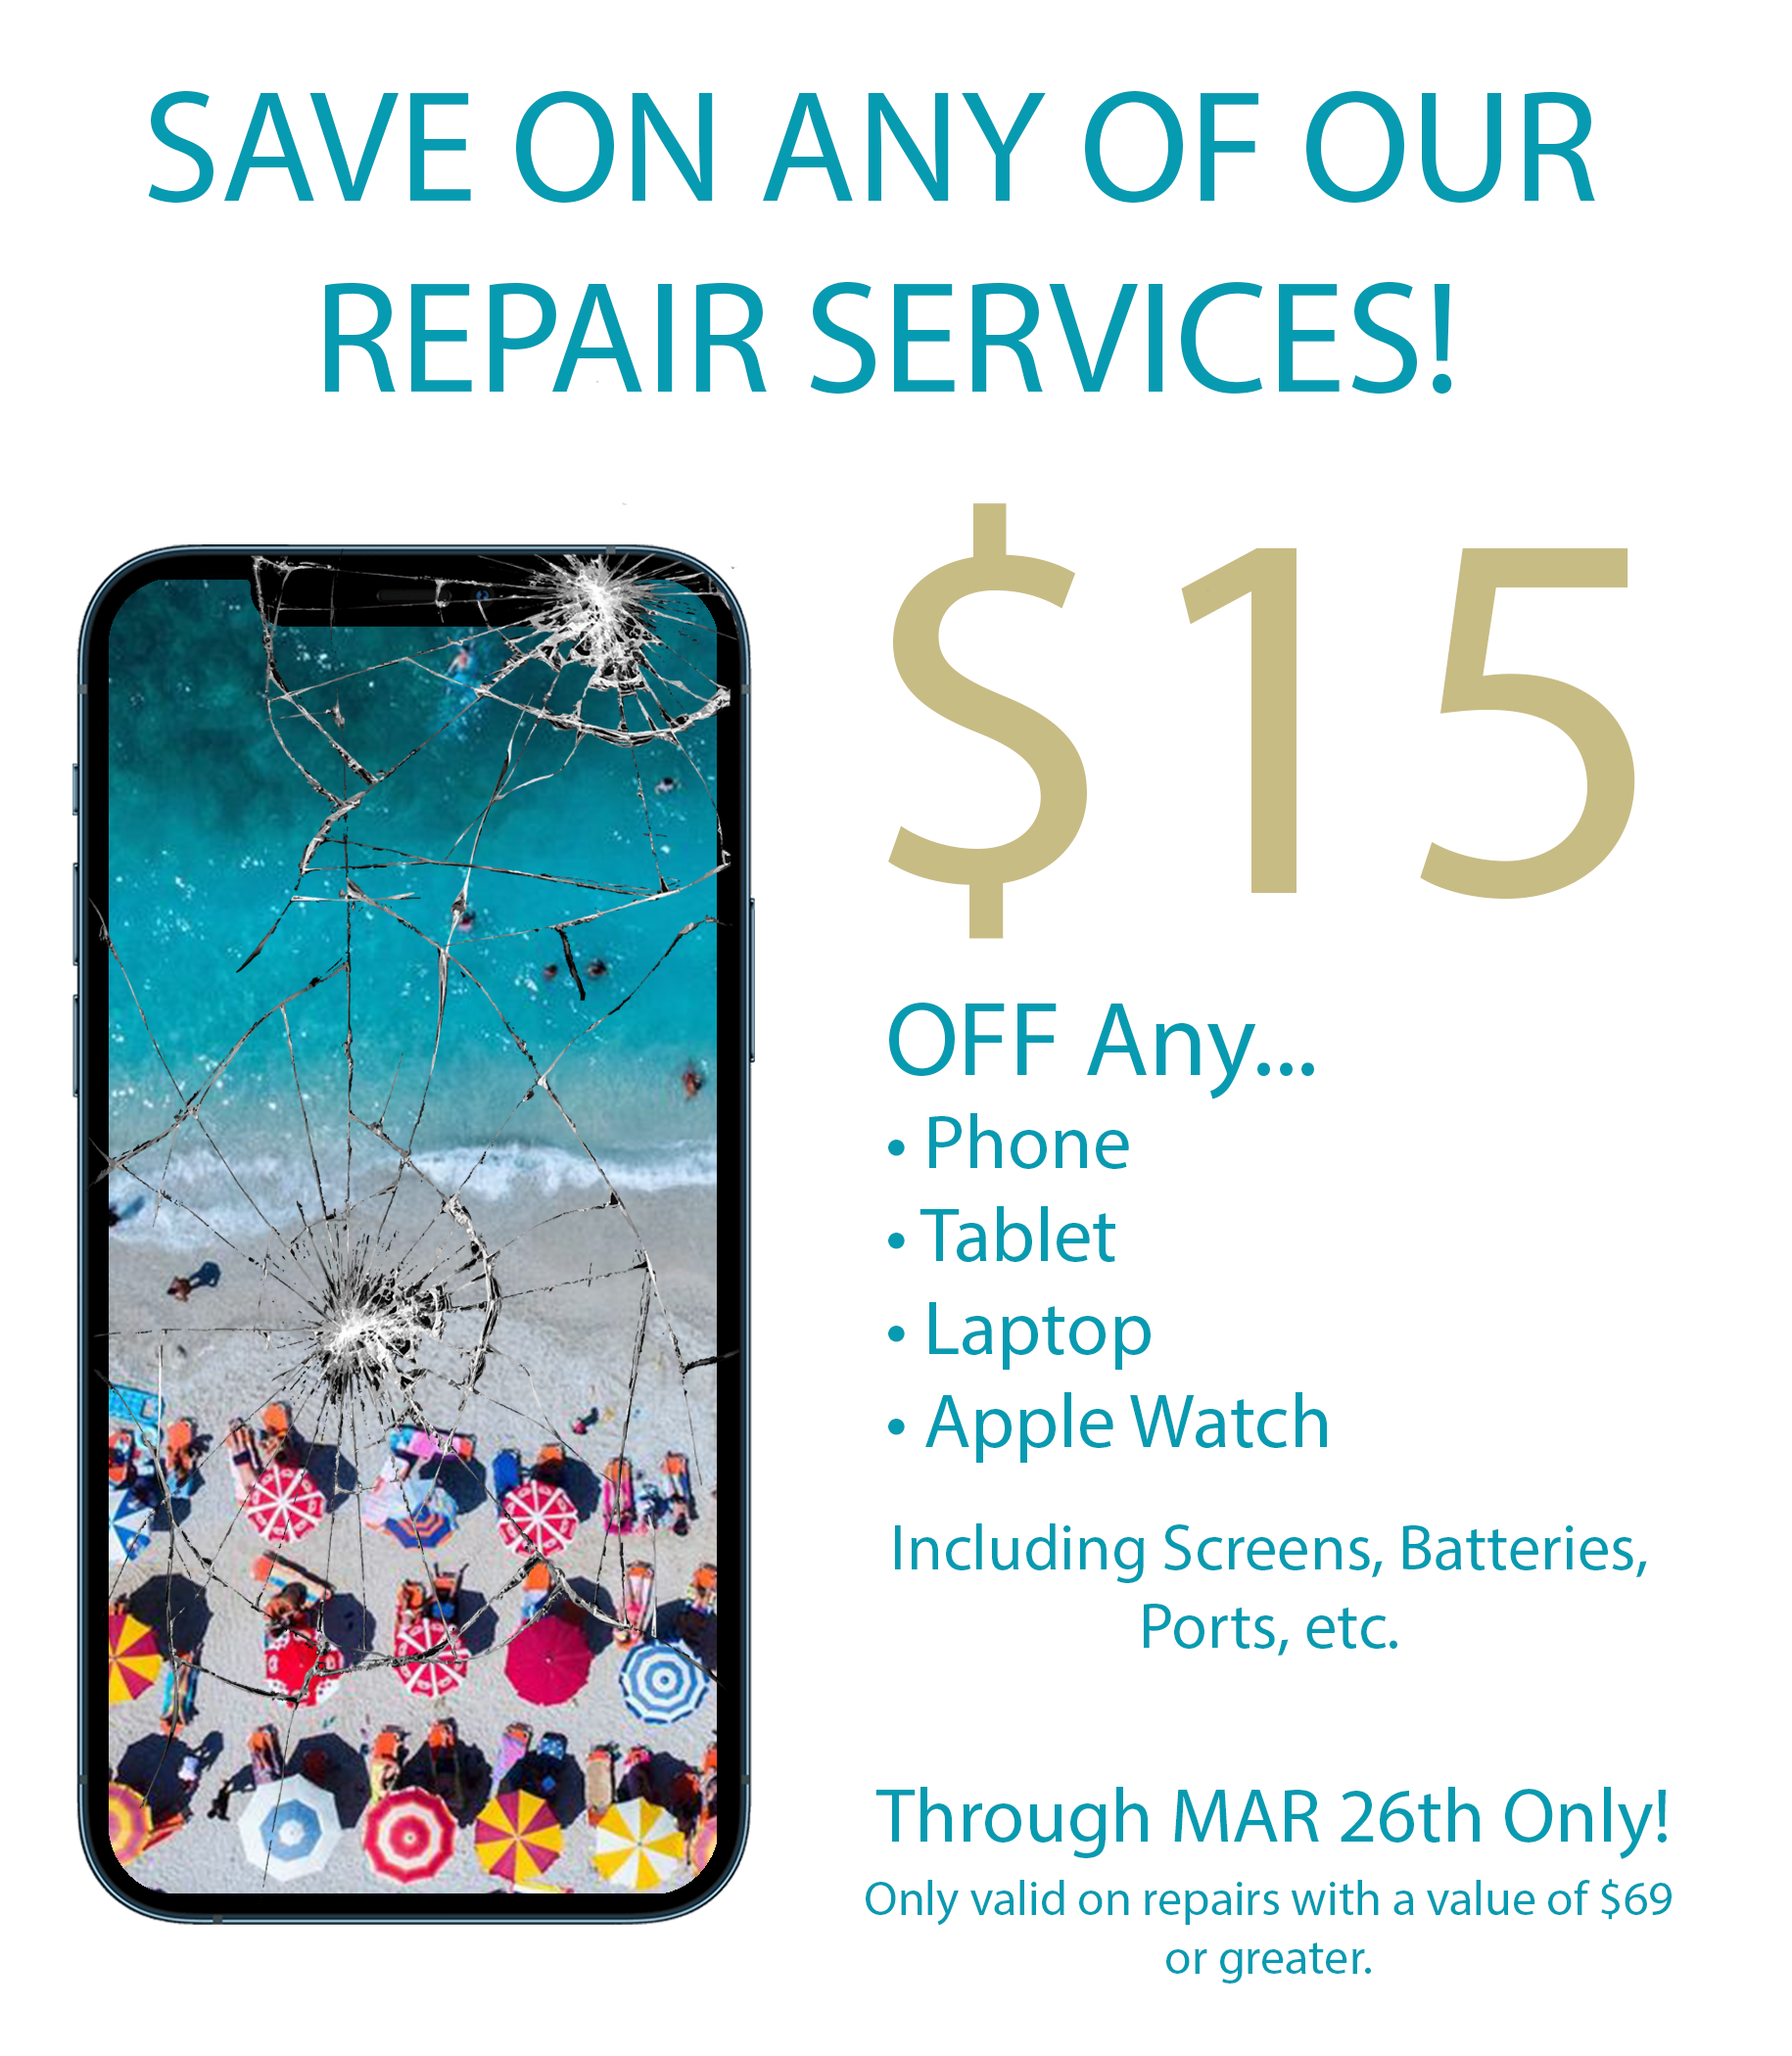 Repair on any Device, iPhone, iPad, Laptop,